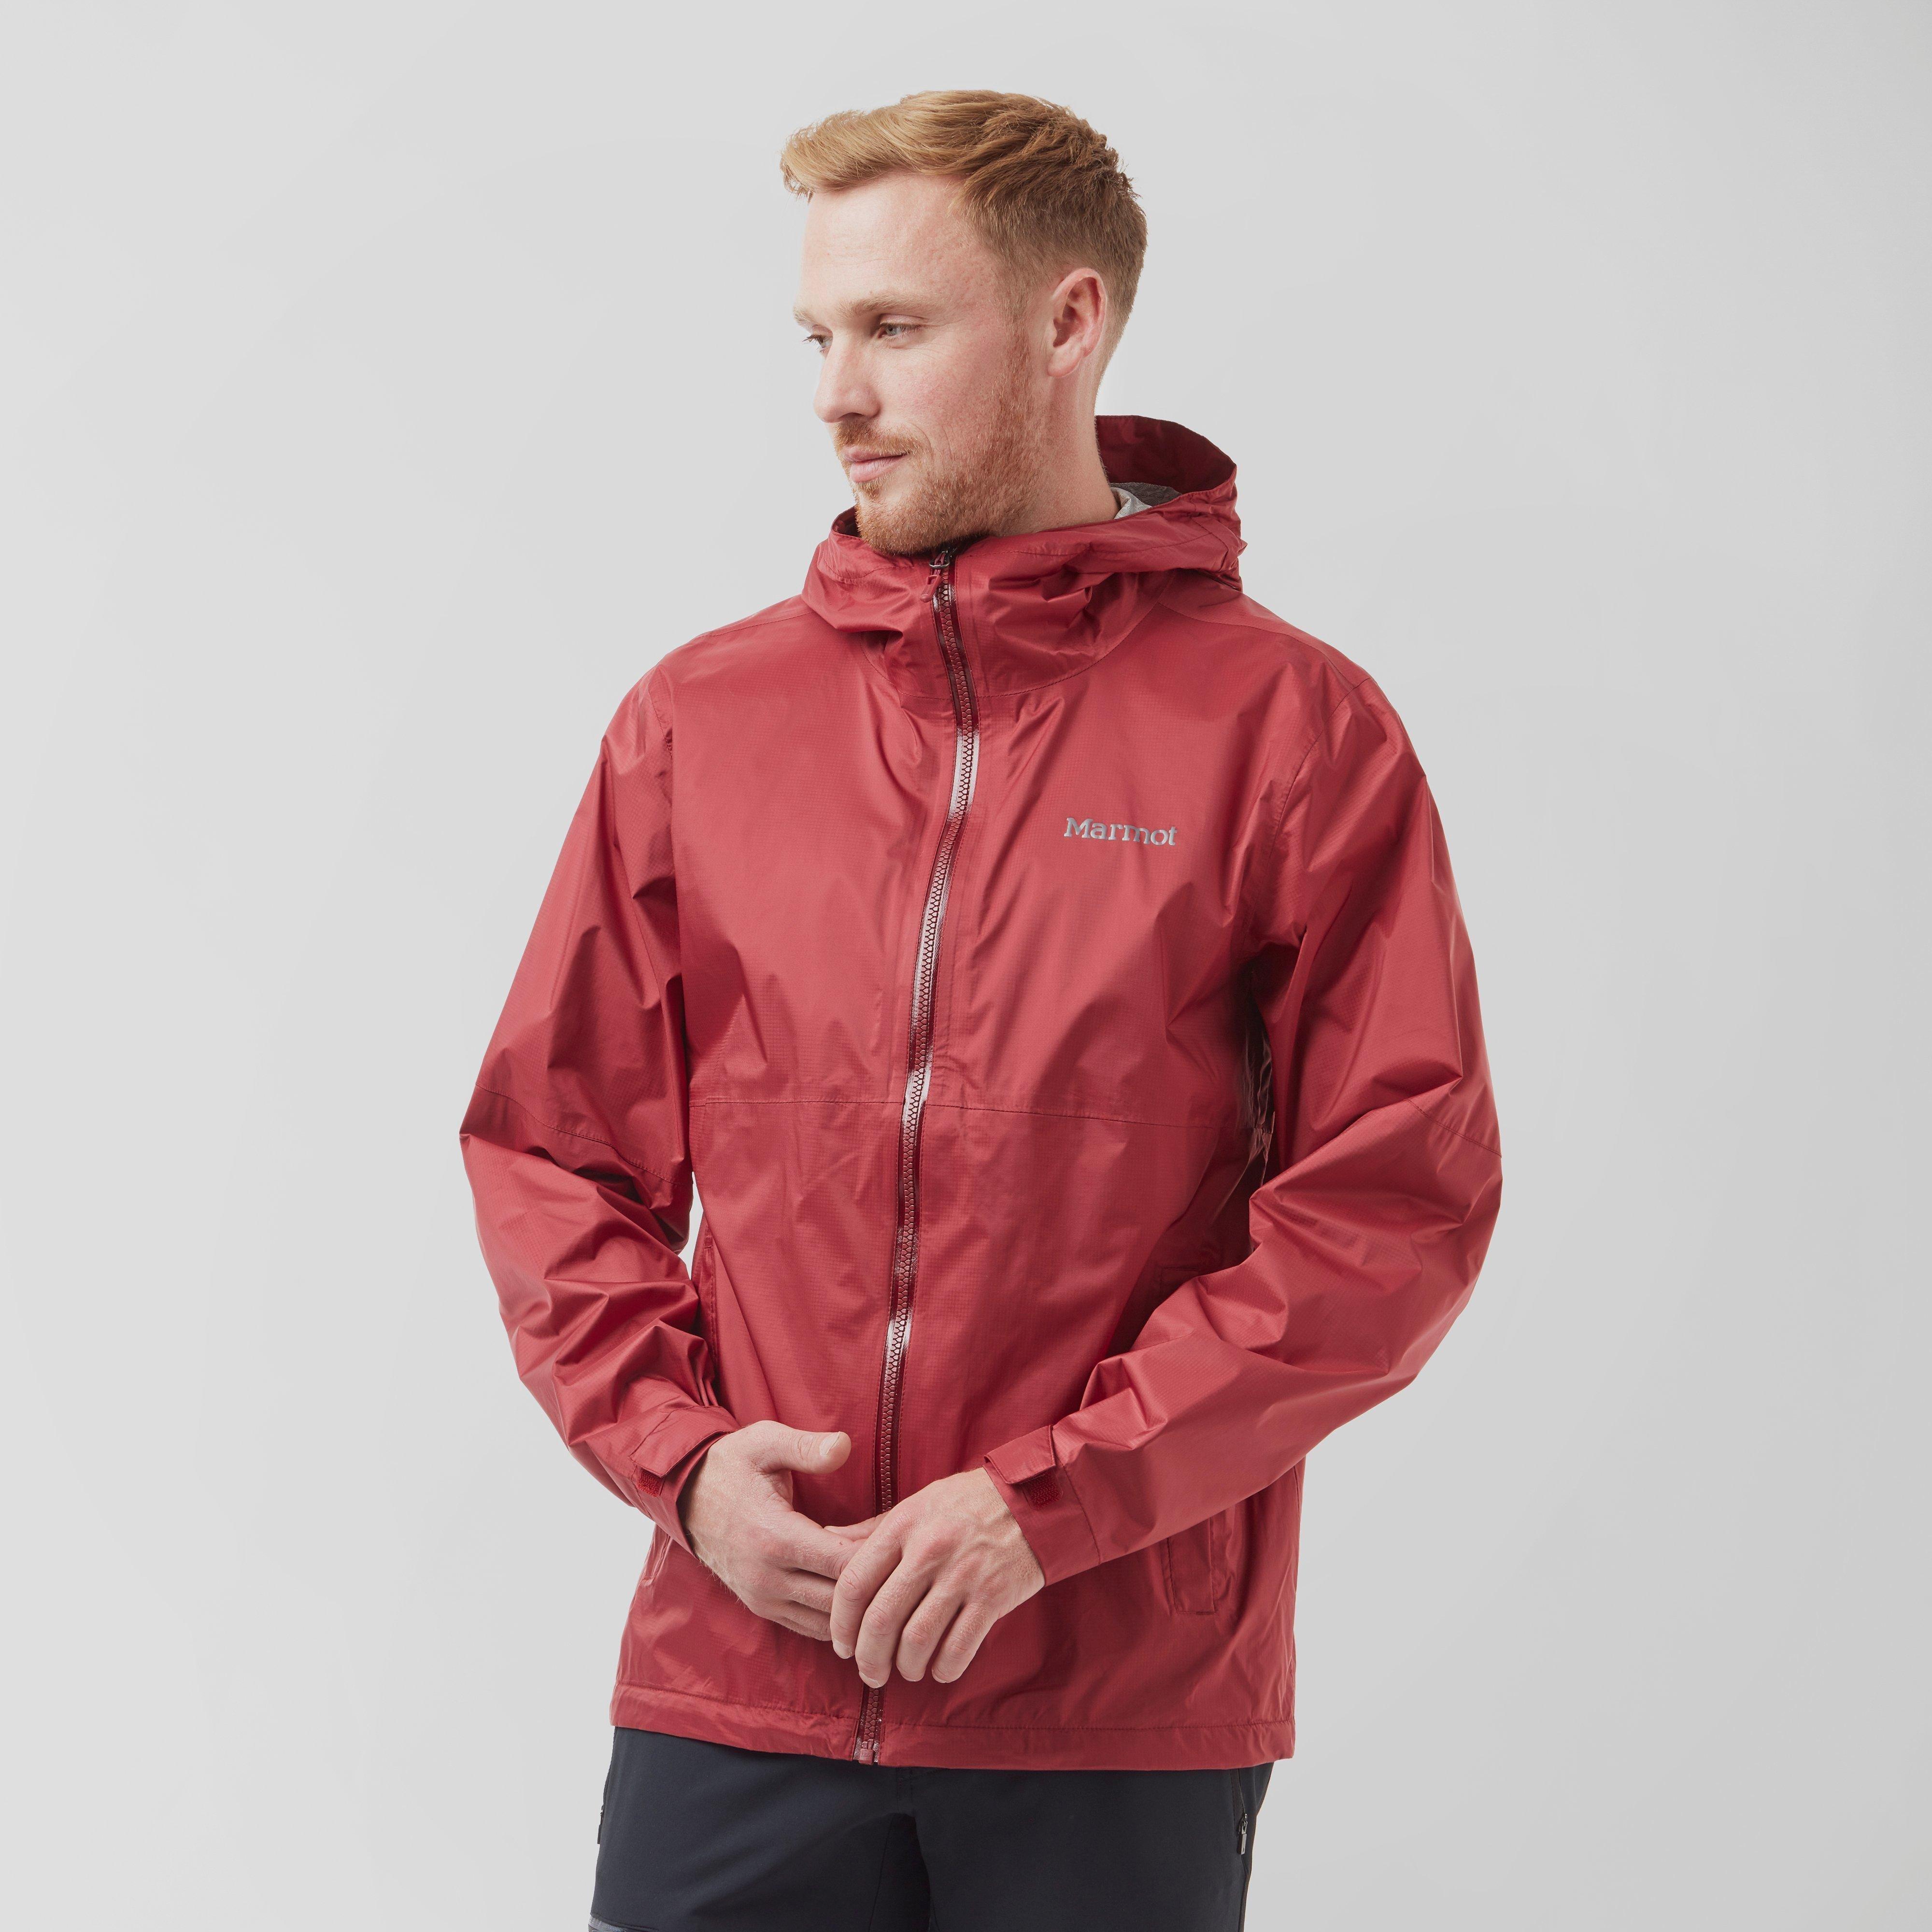 Marmot Mens Precip Eco Plus Jacket - Red/drd  Red/drd